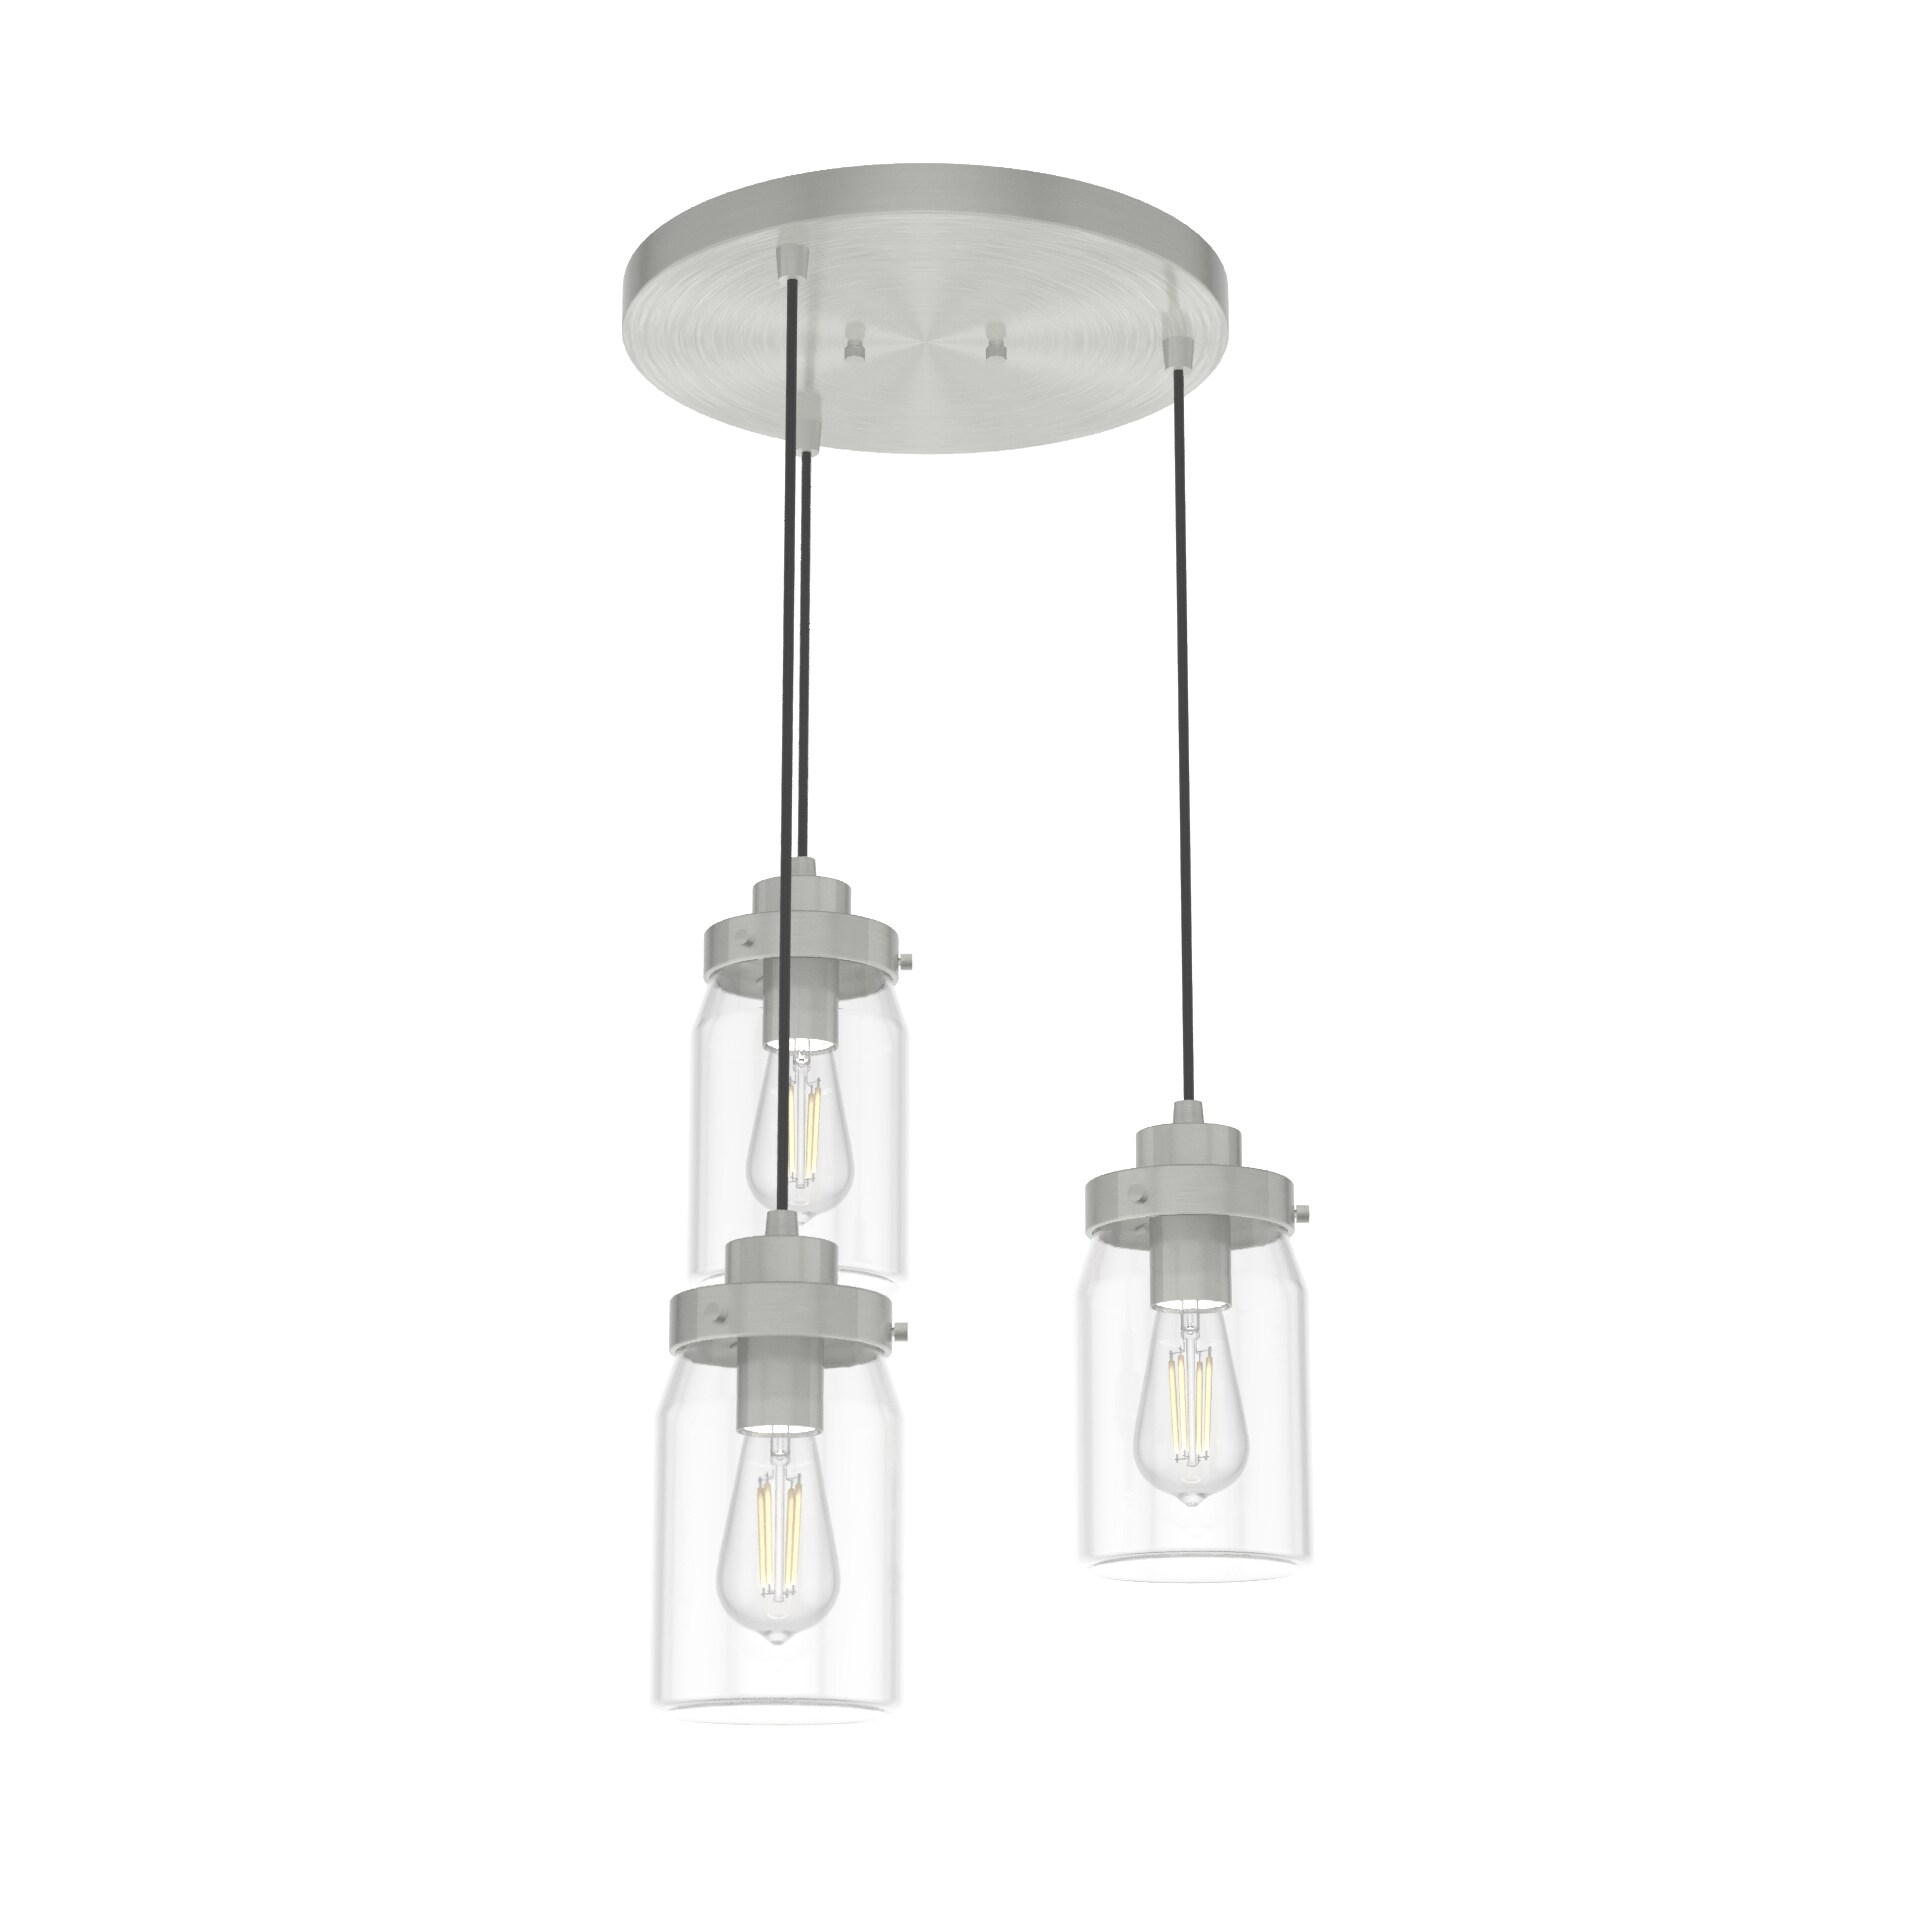 Polished Nickel Steel Pendant Lighting with Glass Shades 